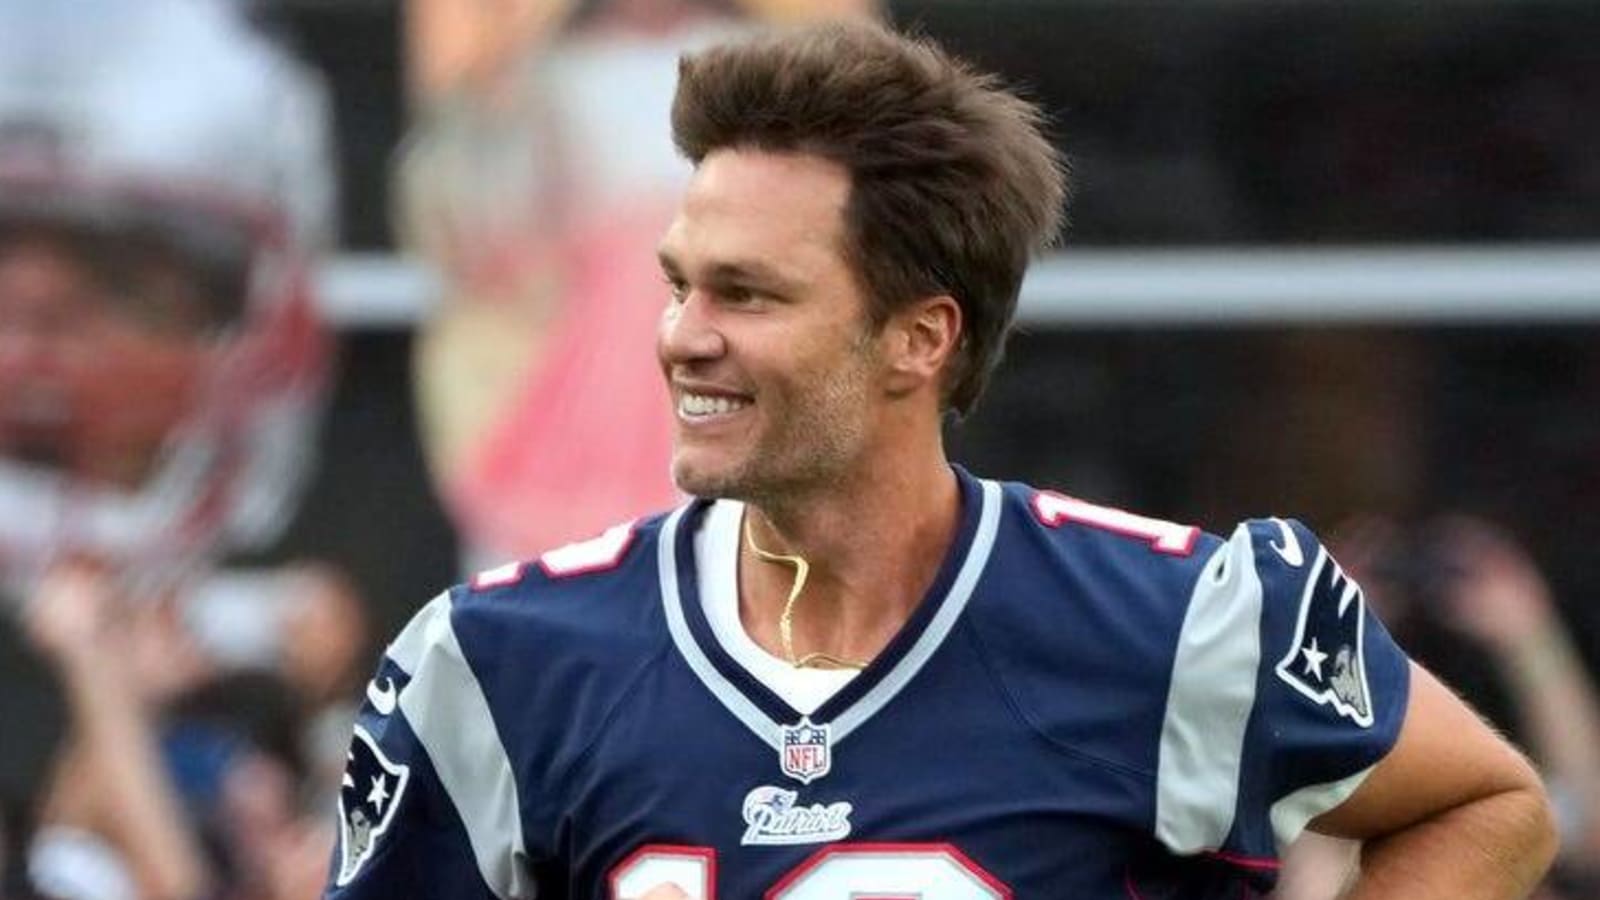 Tom Brady subtly roasts Dak Prescott while acknowledging Cowboys were a great competition to him for a long time